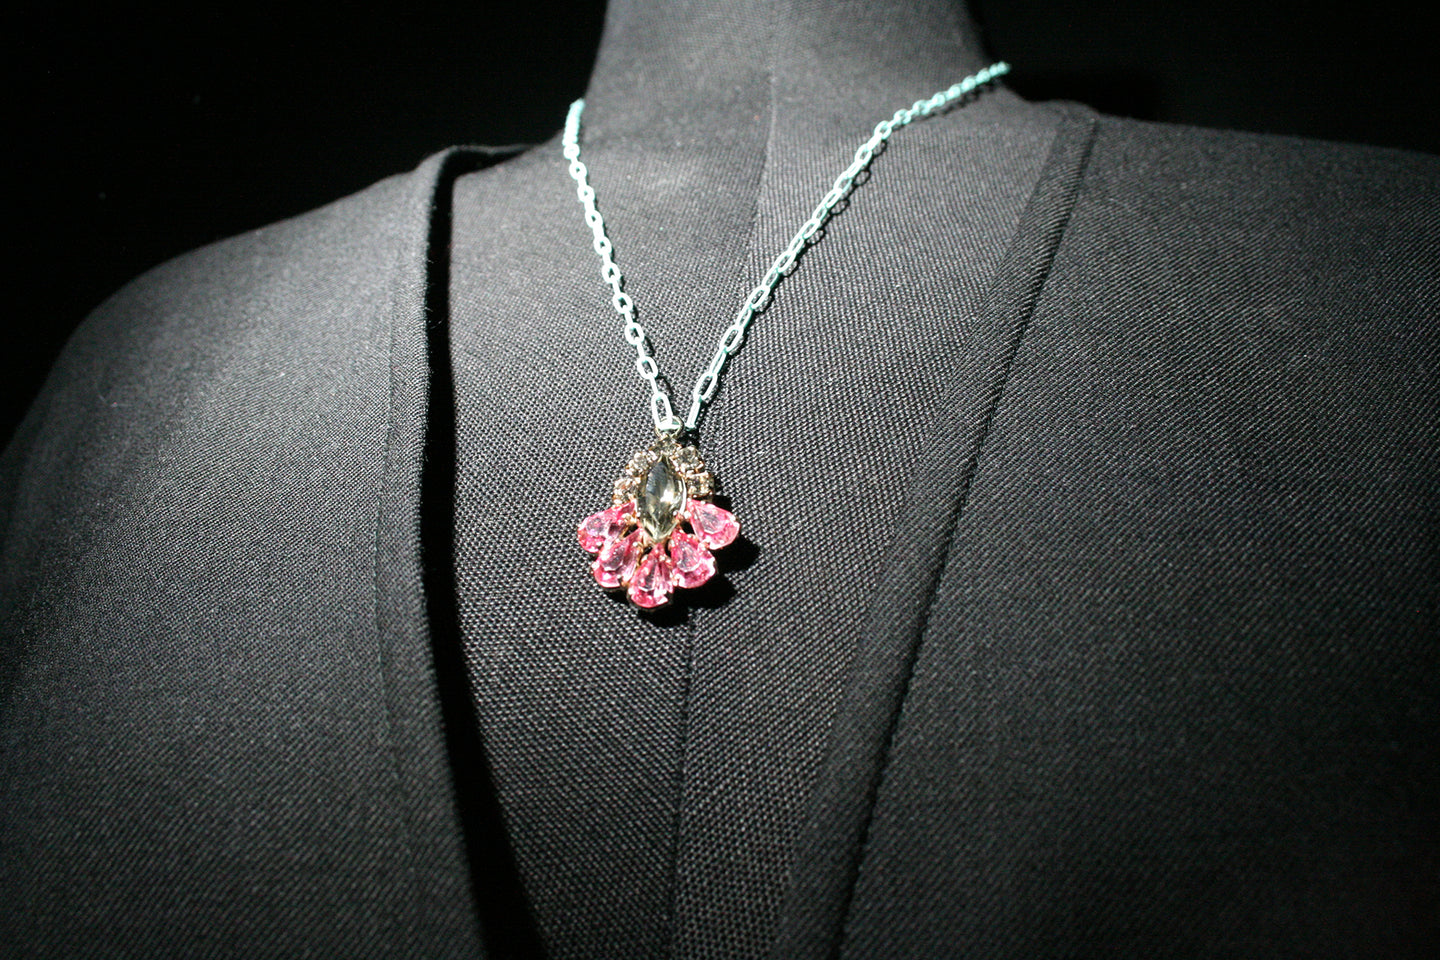 Short necklace with pendant in pink stones.